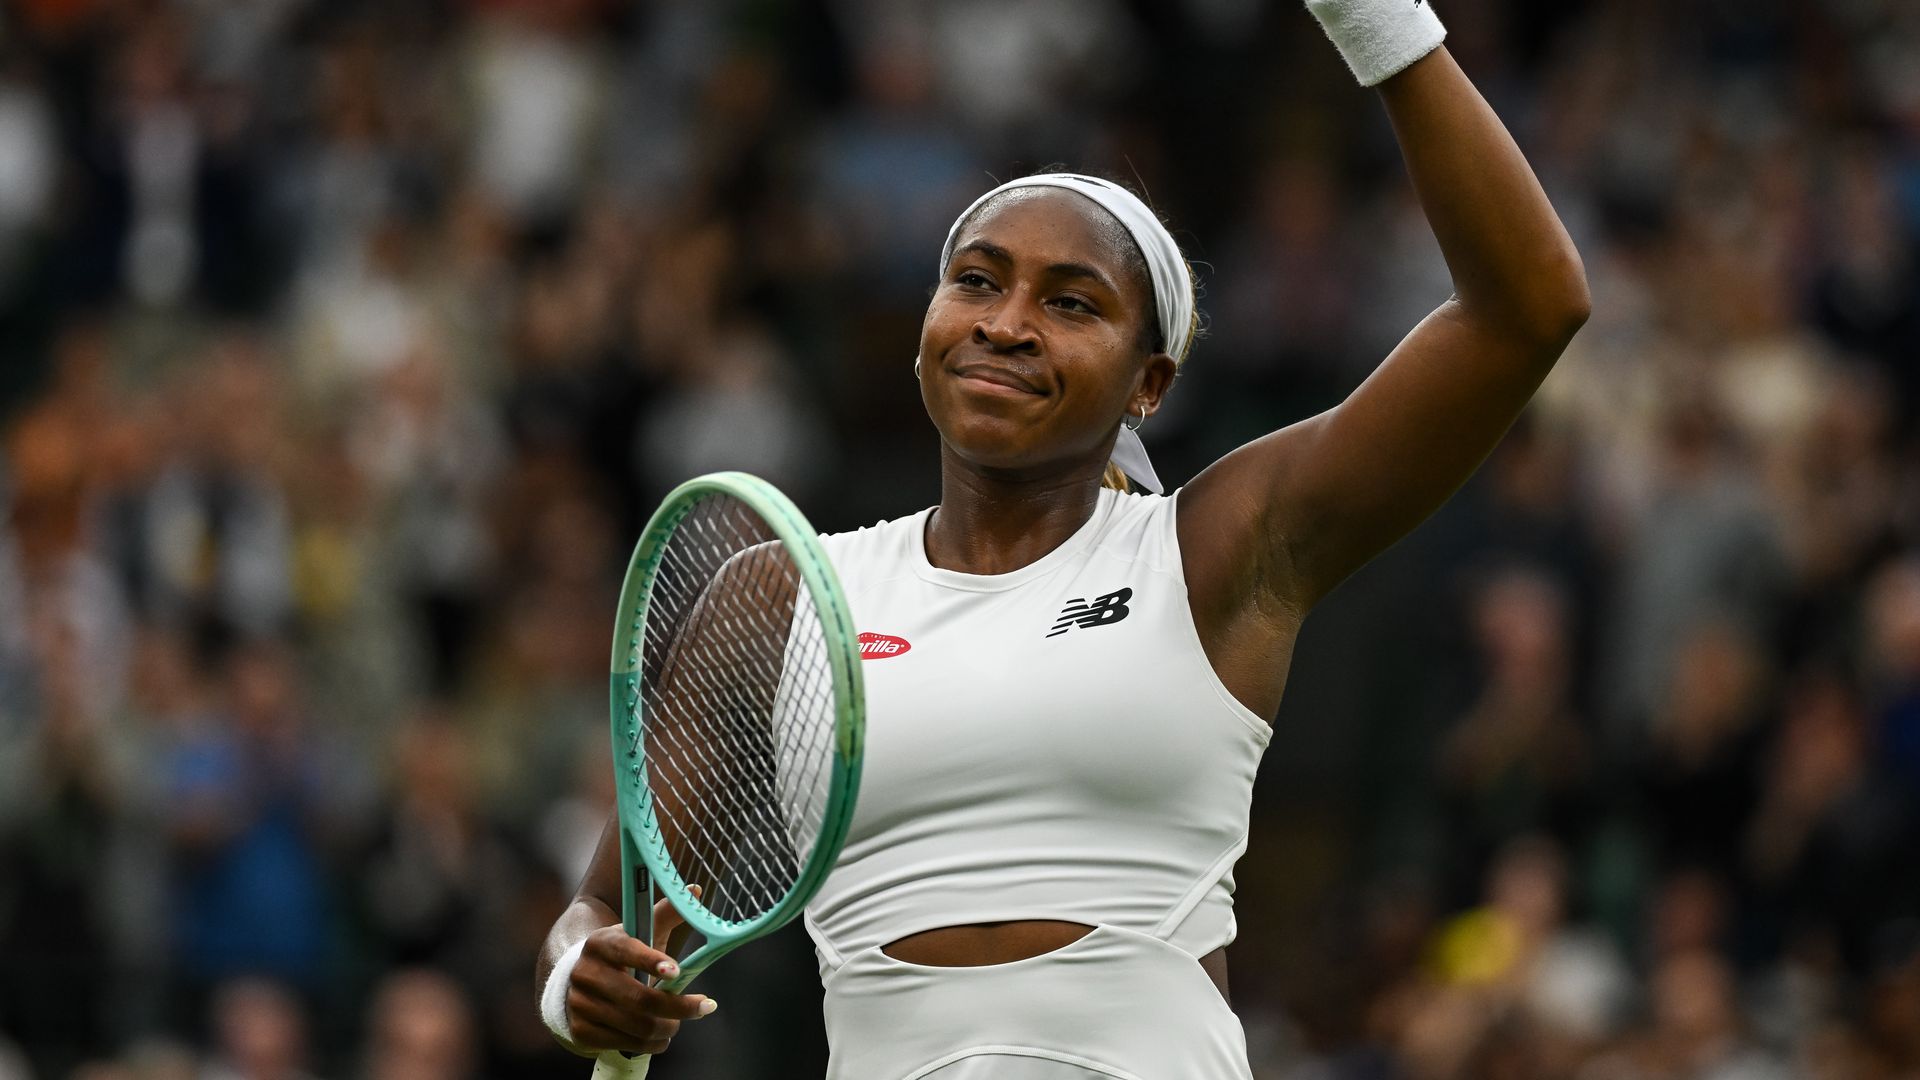 Fashion First: Coco Gauff plans Grand Slam outfits '2 years' in advance